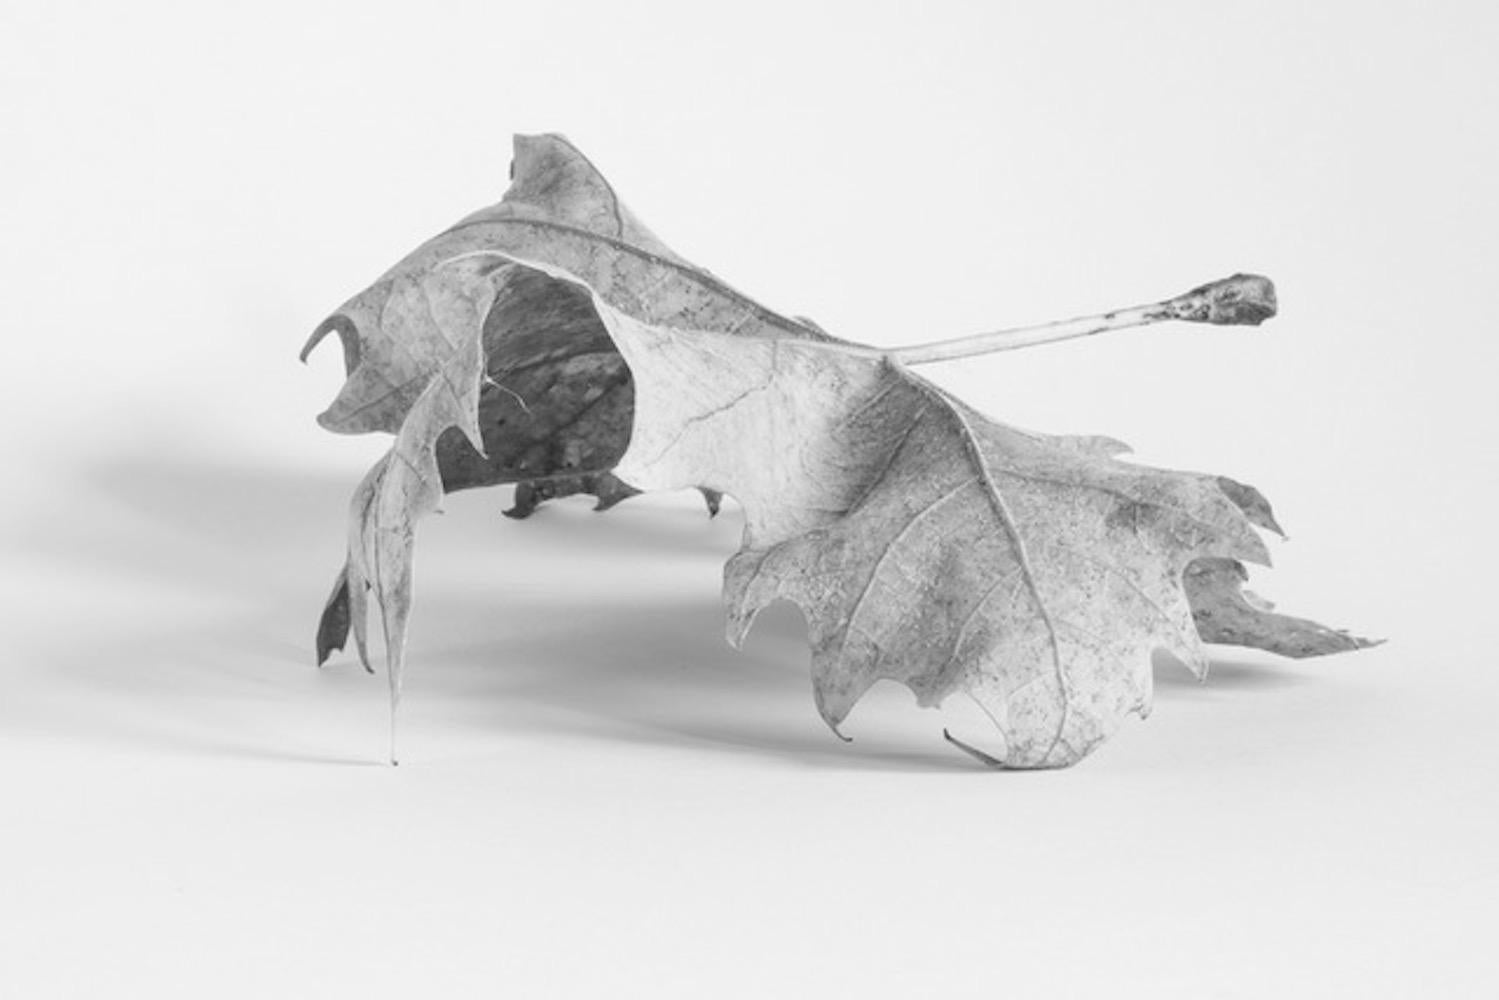 Leaves (set of 7 framed B&W photographs) still life leaf series - Contemporary Photograph by Alyson Belcher